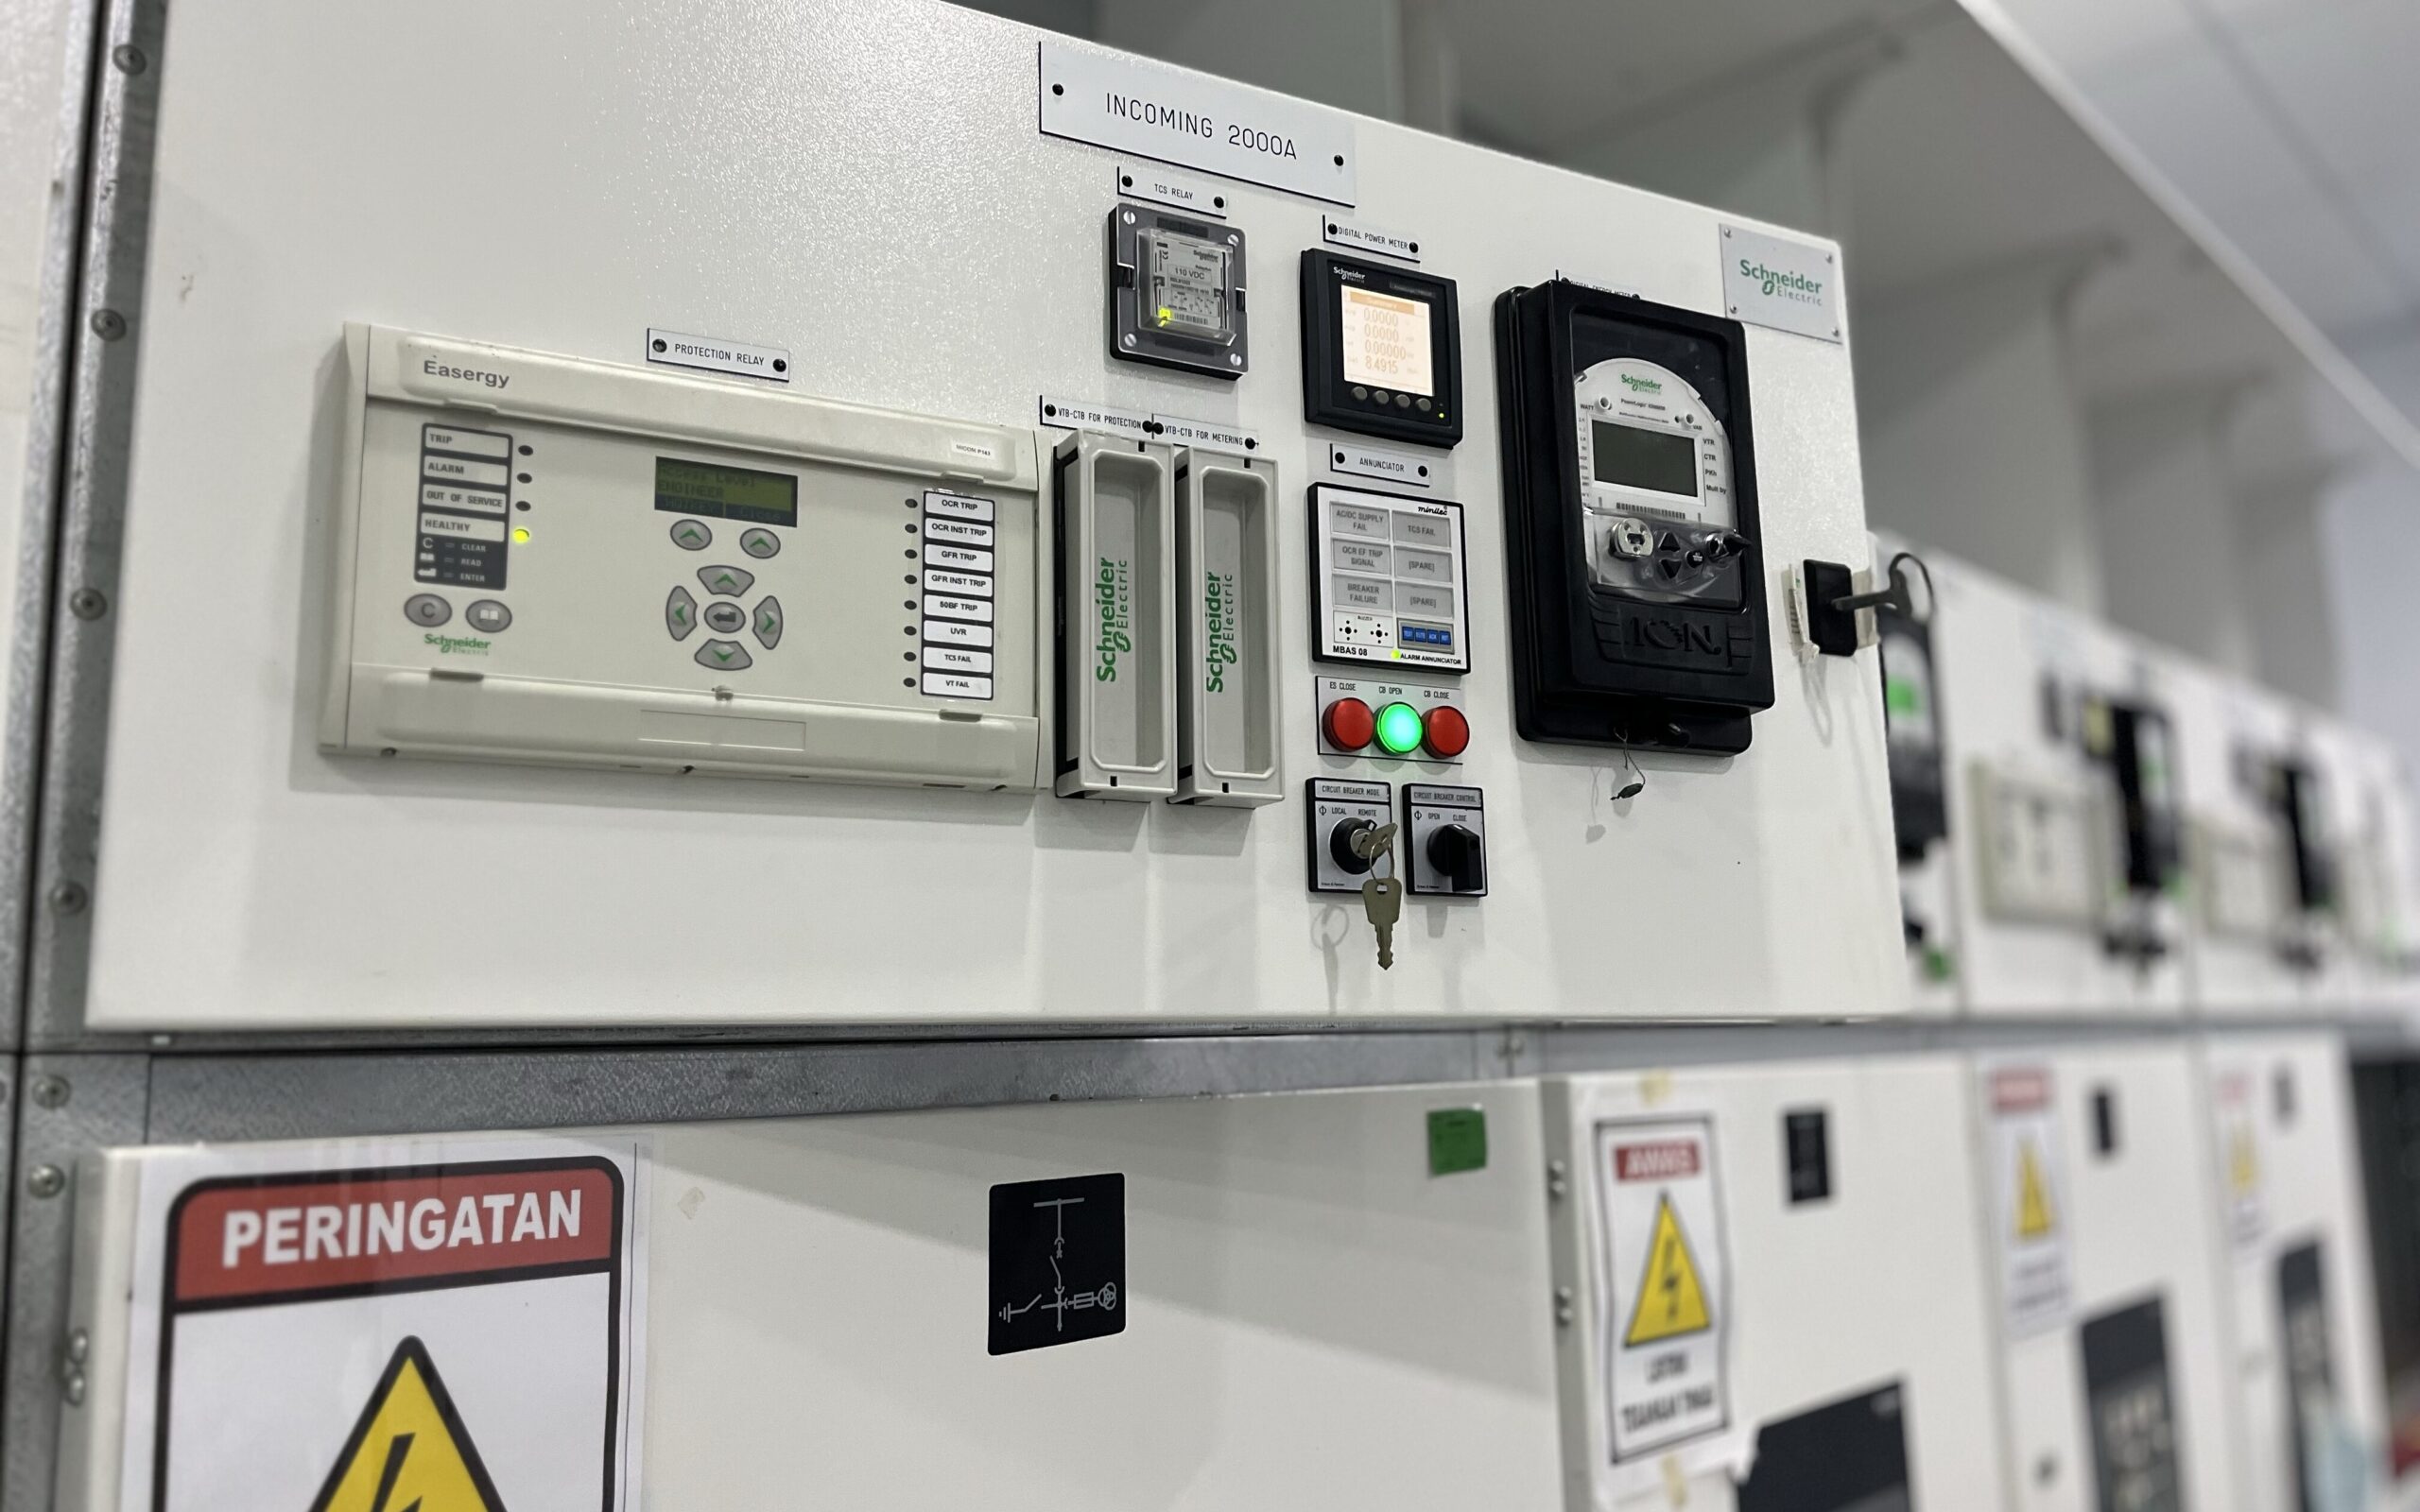 Control Panel within the substation